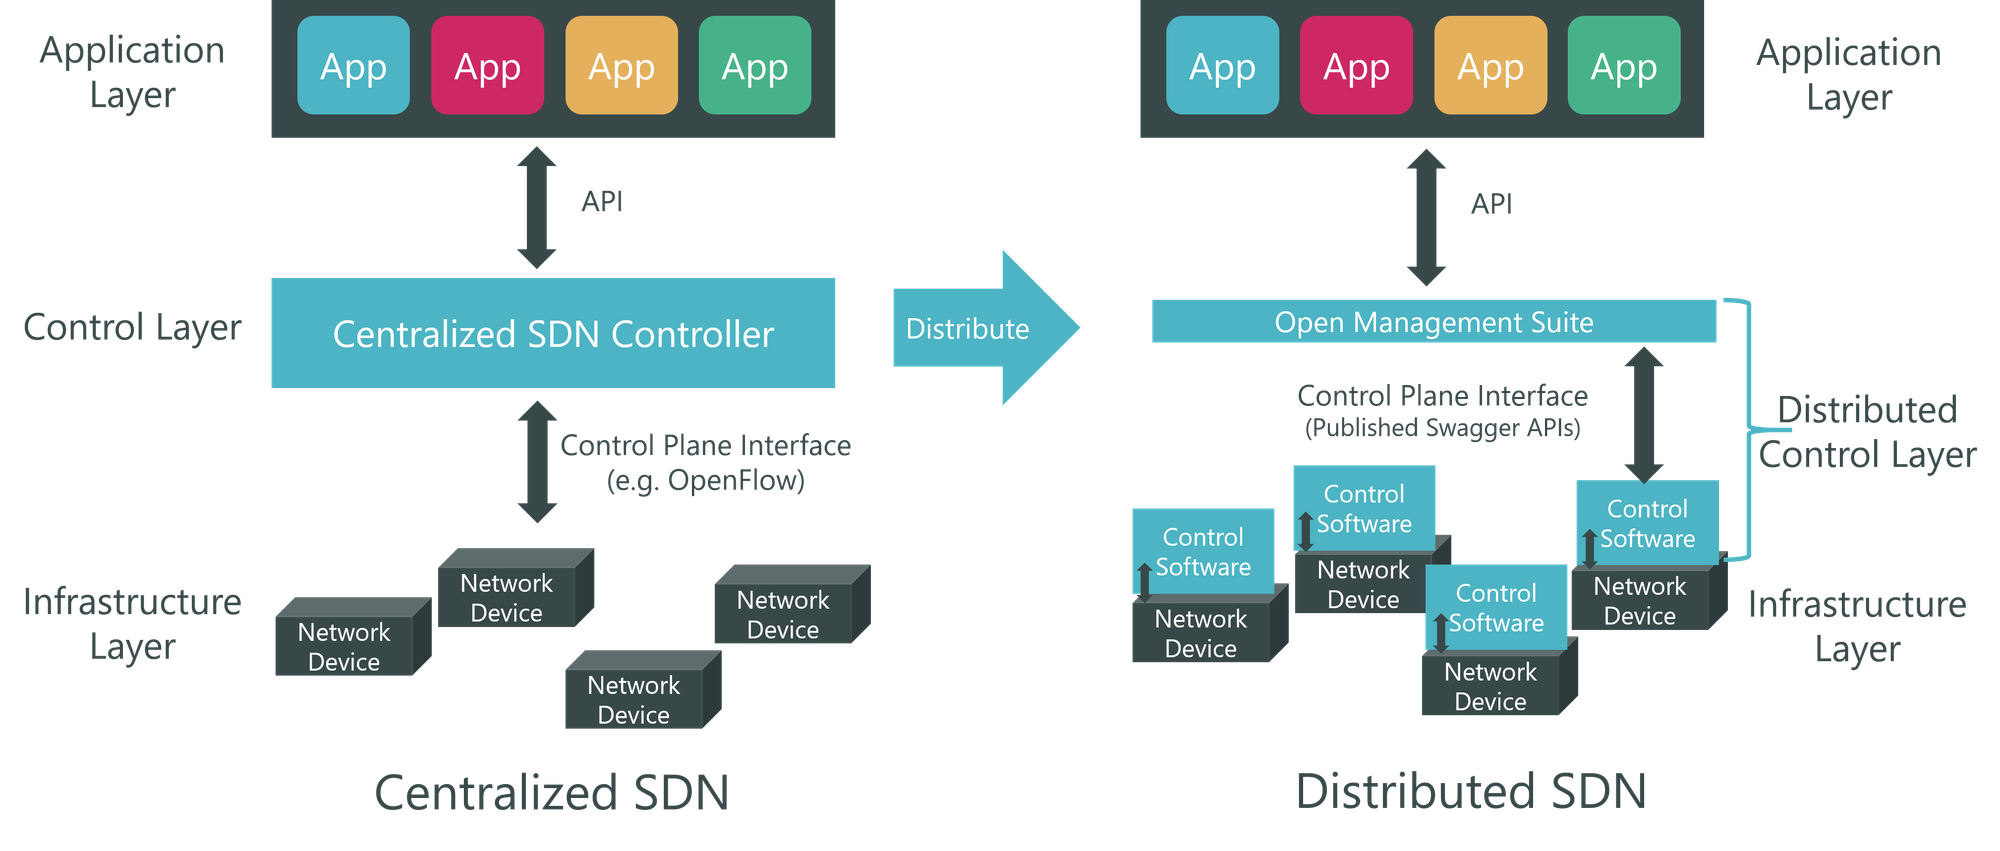 Distributed SDN